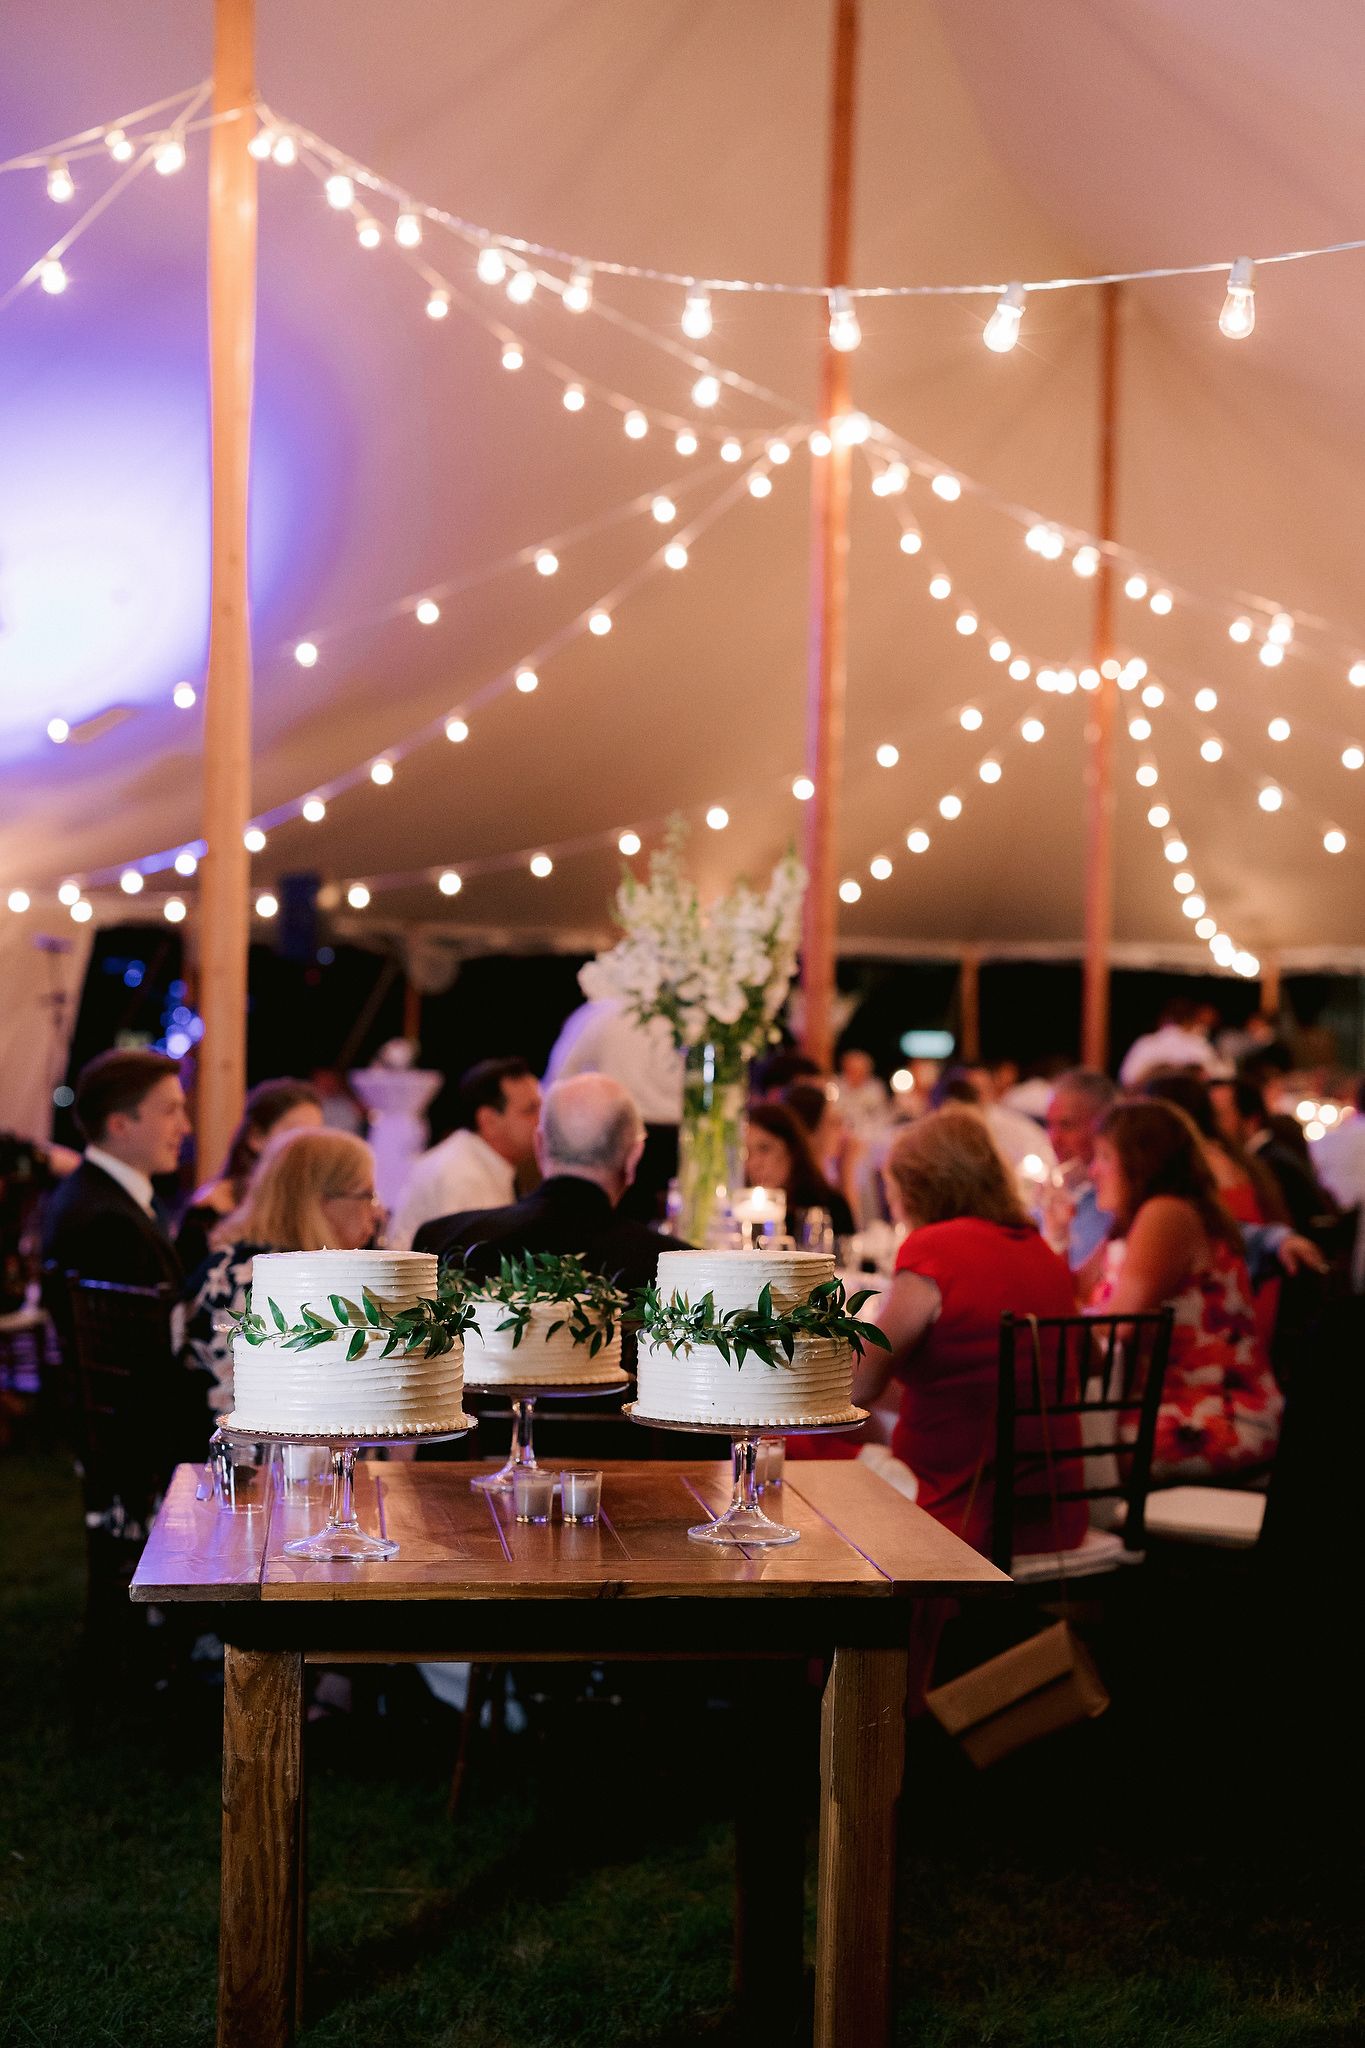 Wedding cake on a table with the guests eating in the pretty background. Wianno Club, Cape Cod, Osterville, MA. Beach wedding venue image by Jenny Fu Studio